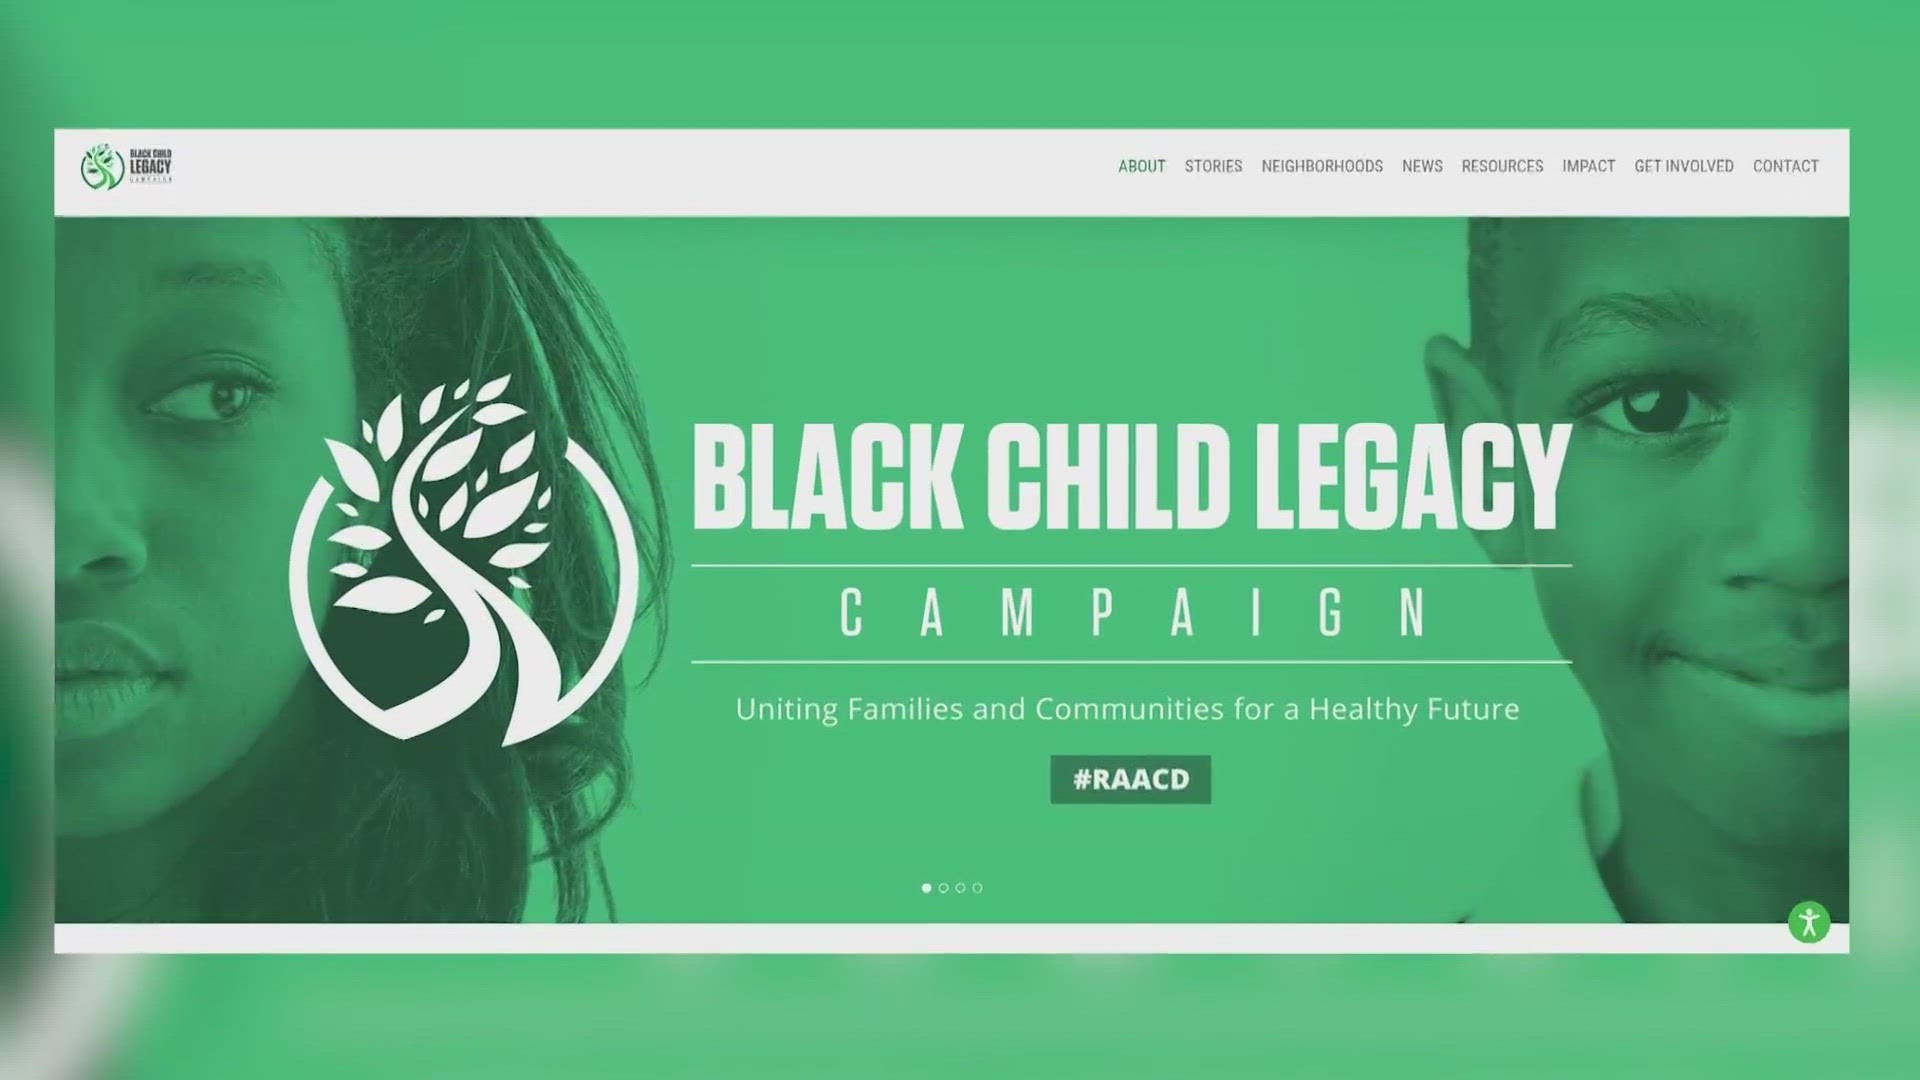 Black Child Legacy Campaign Report | Race and Culture